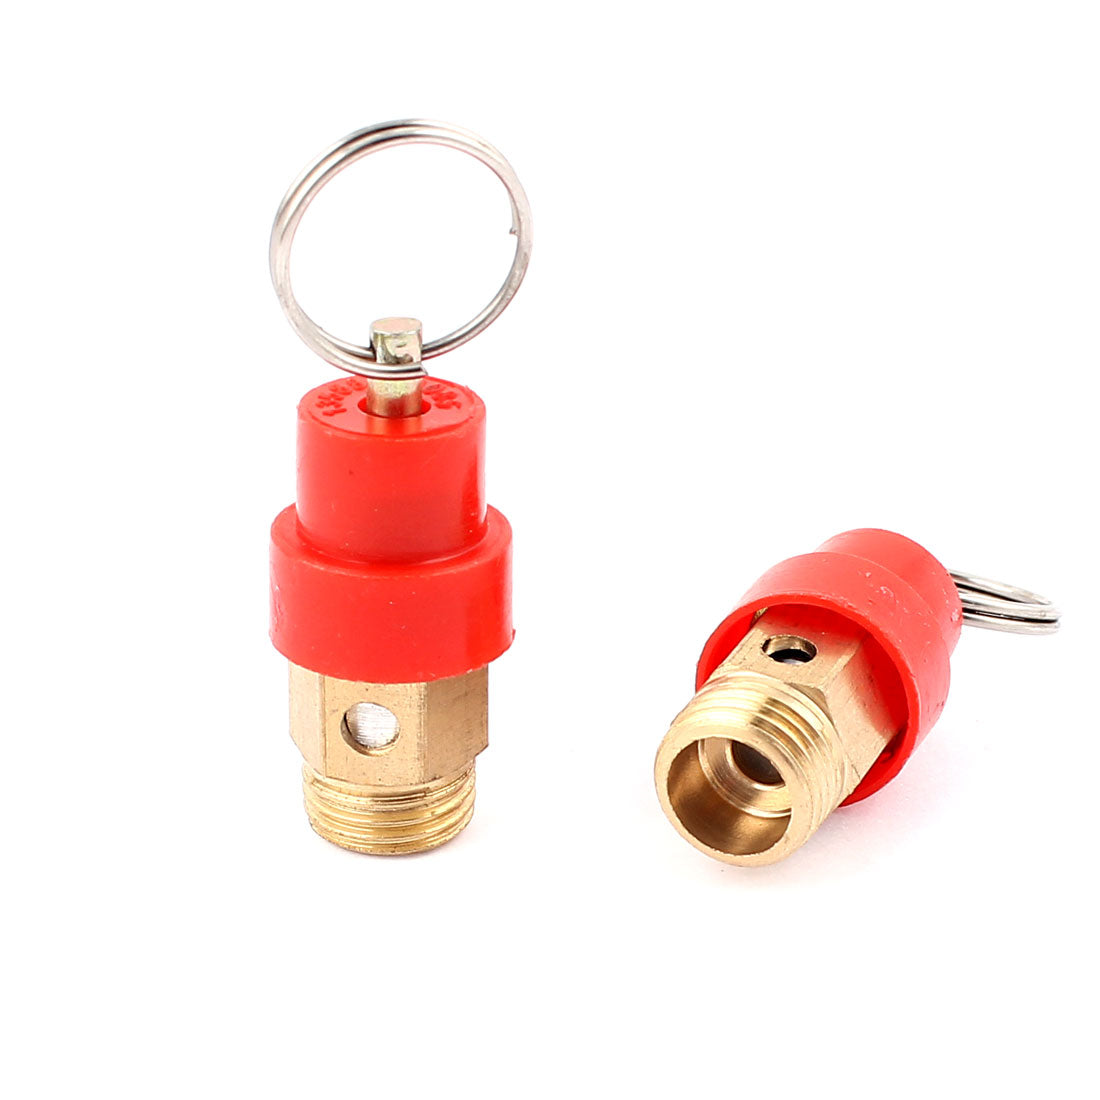 uxcell Uxcell 2pcs 13mm 1/4BSP Male Thread Metal Air Compressor Pressure Relief Valve Control Device